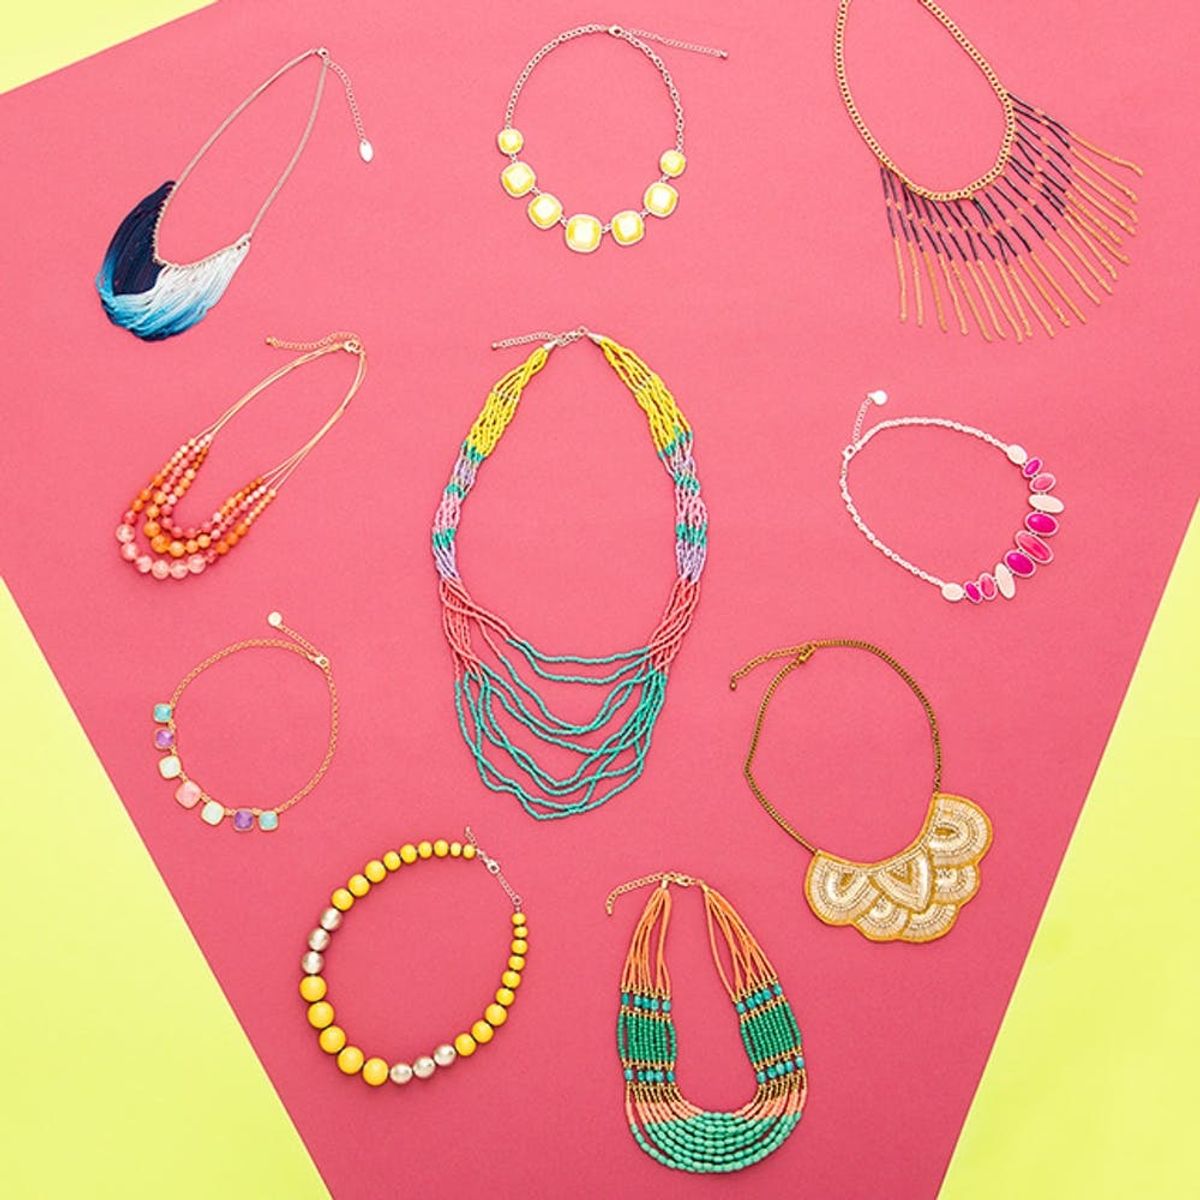 10 Swoon-worthy Statement Necklaces Mom Will LOVE